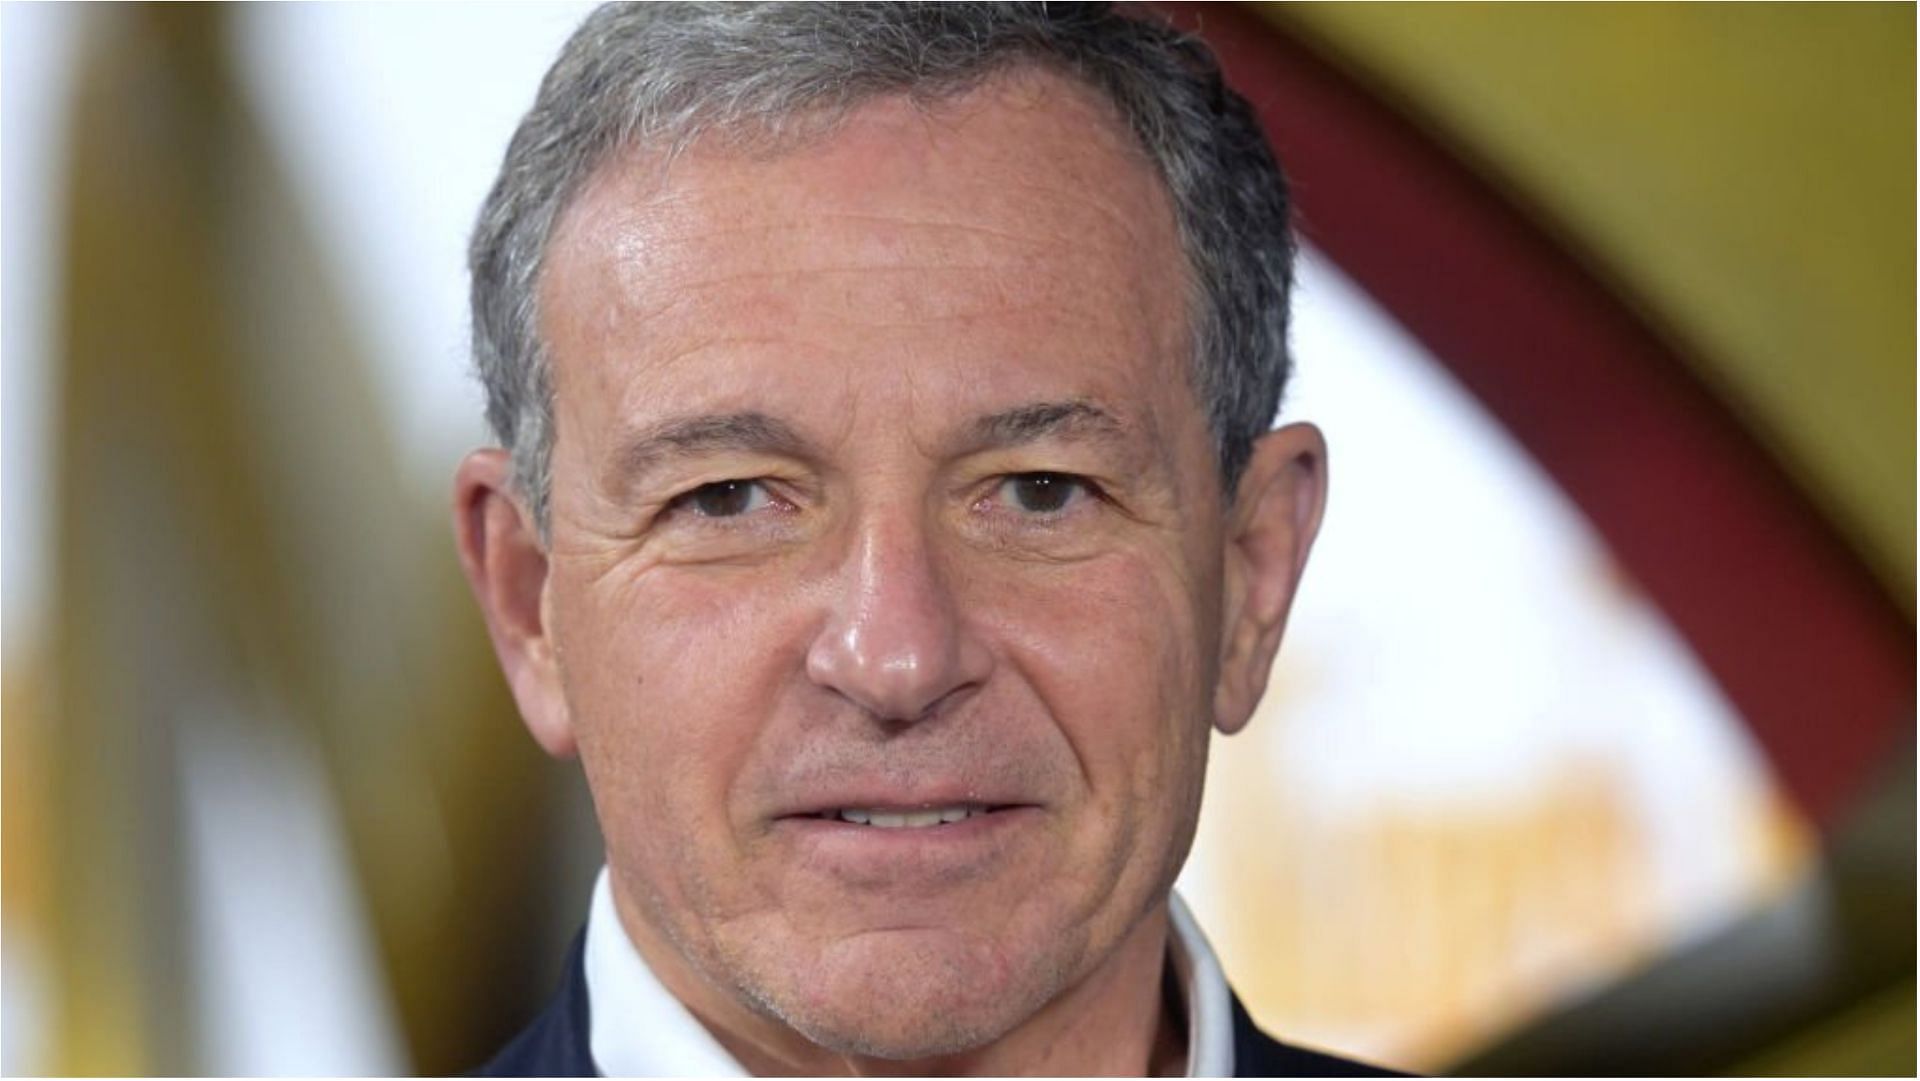 Bob Iger is returning as the CEO of The Walt Disney Company (Image via Dave J Hogan/Getty Images)